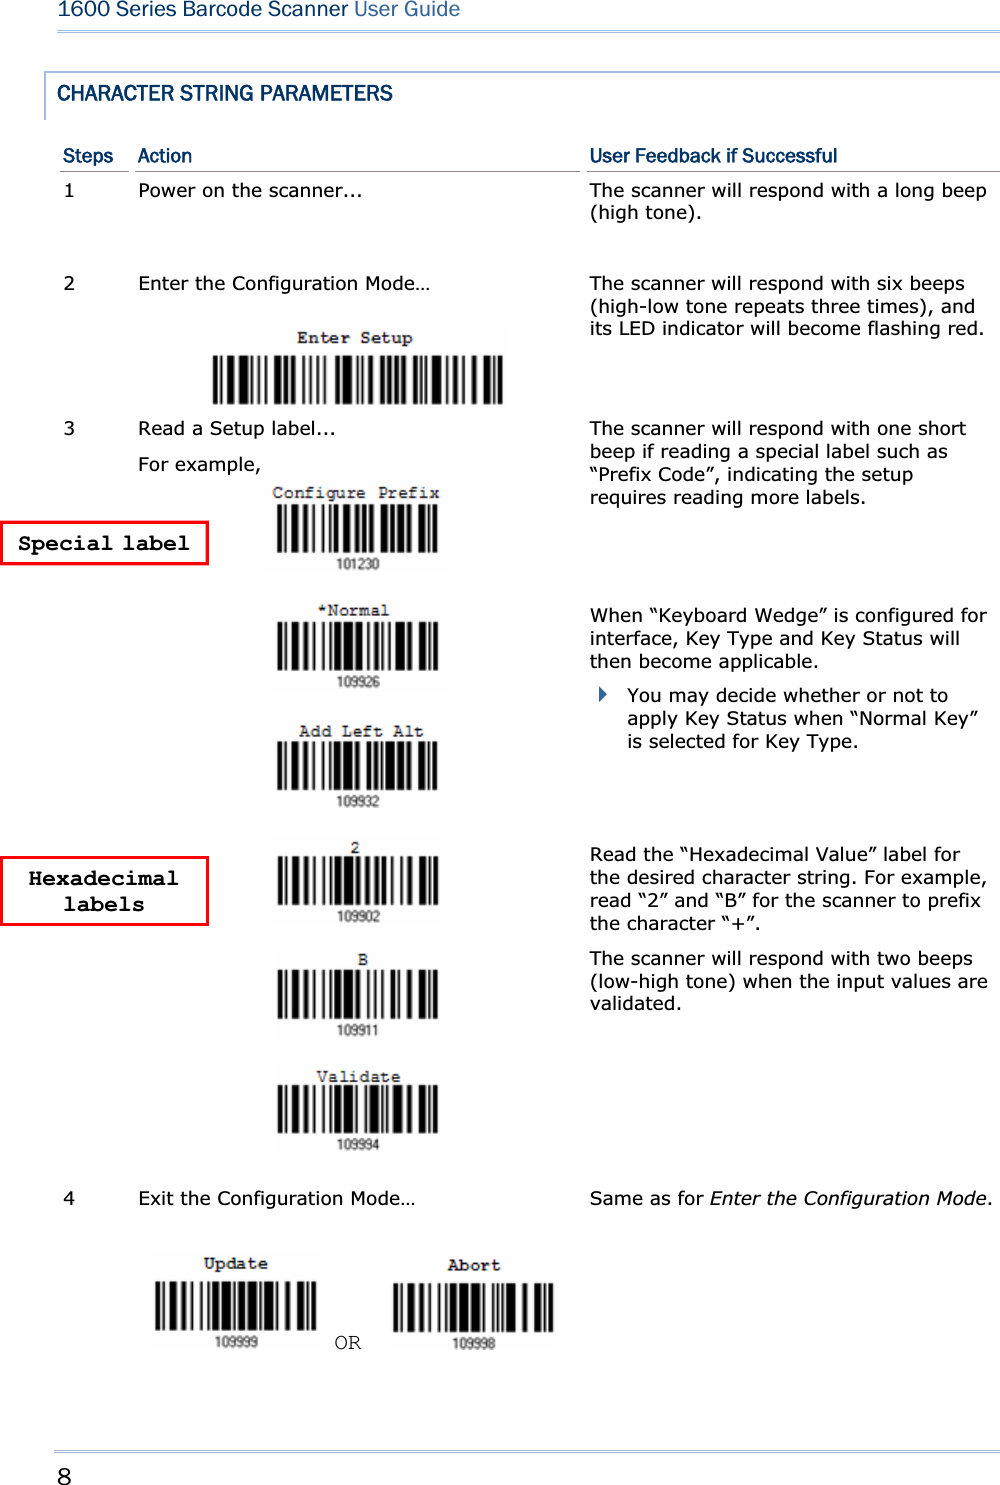 81600 Series Barcode Scanner User GuideCHARACTER STRING PARAMETERS Steps  Action  User Feedback if Successful 1  Power on the scanner...  The scanner will respond with a long beep (high tone). 2  Enter the Configuration Mode…  The scanner will respond with six beeps (high-low tone repeats three times), and its LED indicator will become flashing red.Read a Setup label... For example, The scanner will respond with one short beep if reading a special label such as “Prefix Code”, indicating the setup requires reading more labels.   When “Keyboard Wedge” is configured for interface, Key Type and Key Status will then become applicable. You may decide whether or not to apply Key Status when “Normal Key” is selected for Key Type. 3Read the “Hexadecimal Value” label for the desired character string. For example, read “2” and “B” for the scanner to prefix the character “+”. The scanner will respond with two beeps (low-high tone) when the input values are validated. 4  Exit the Configuration Mode…  ORSame as for Enter the Configuration Mode.Special label Hexadecimallabels